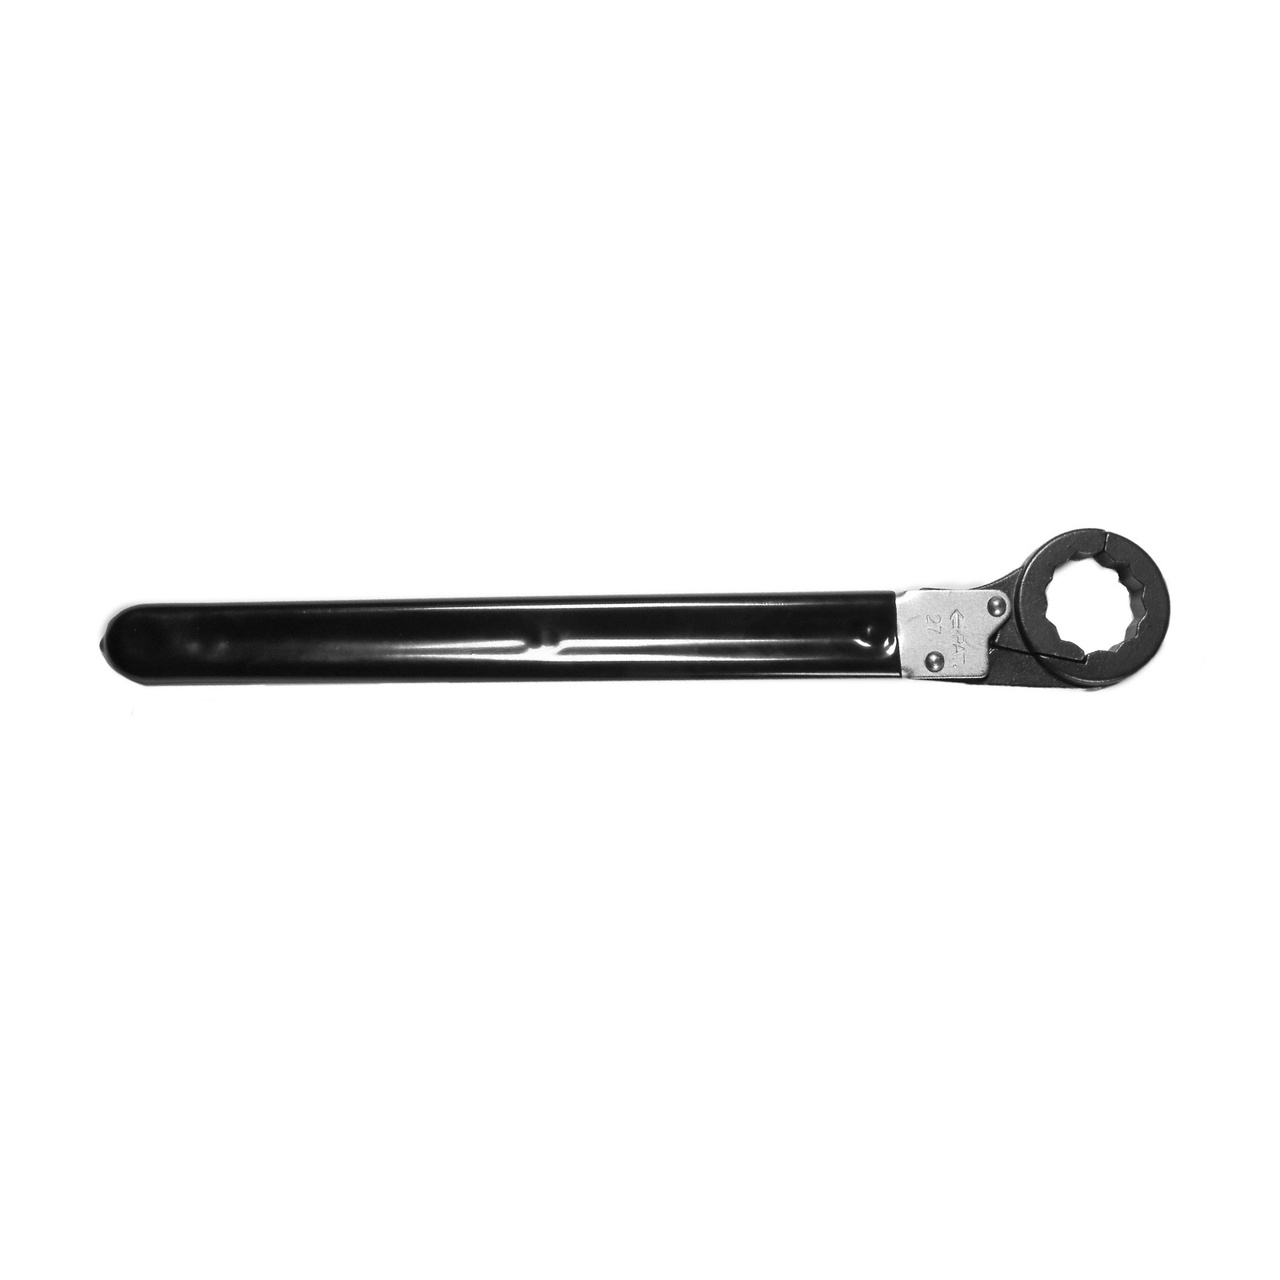 Open Ratchet Wrench 14 mm